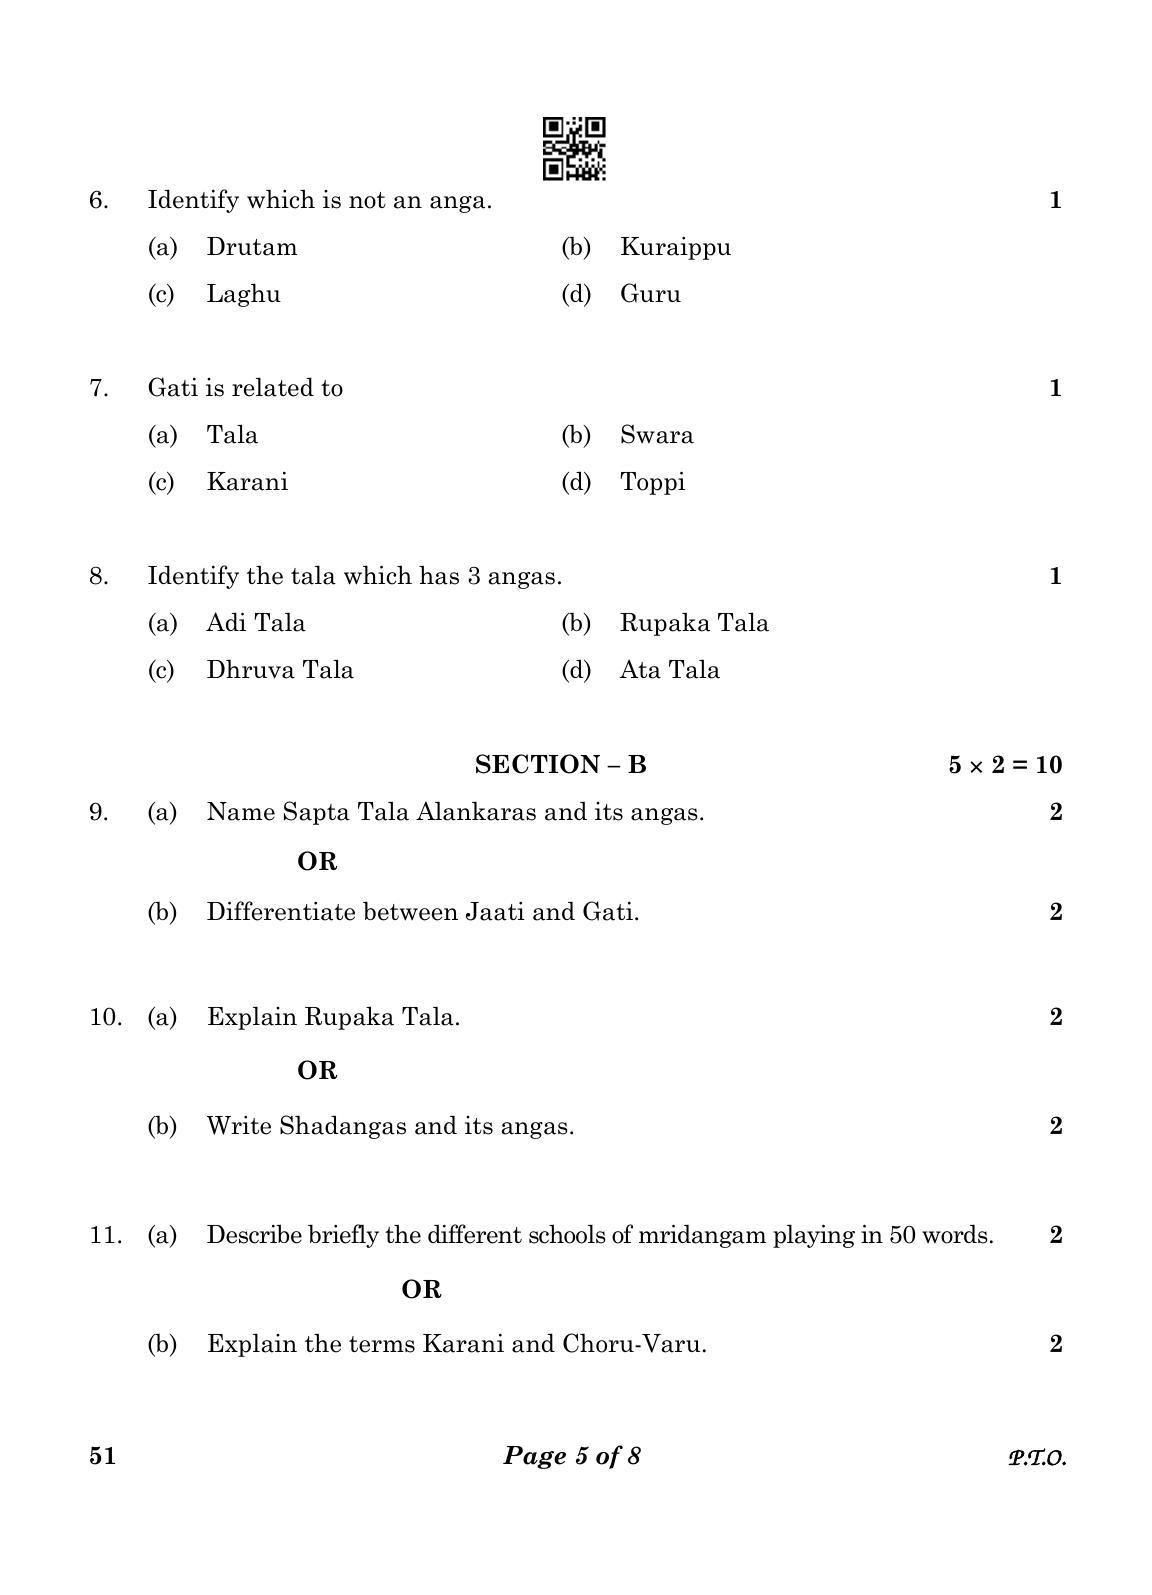 CBSE Class 10 51 CARNATIC MUSIC (Percussion Instruments) 2023 Question Paper - Page 5